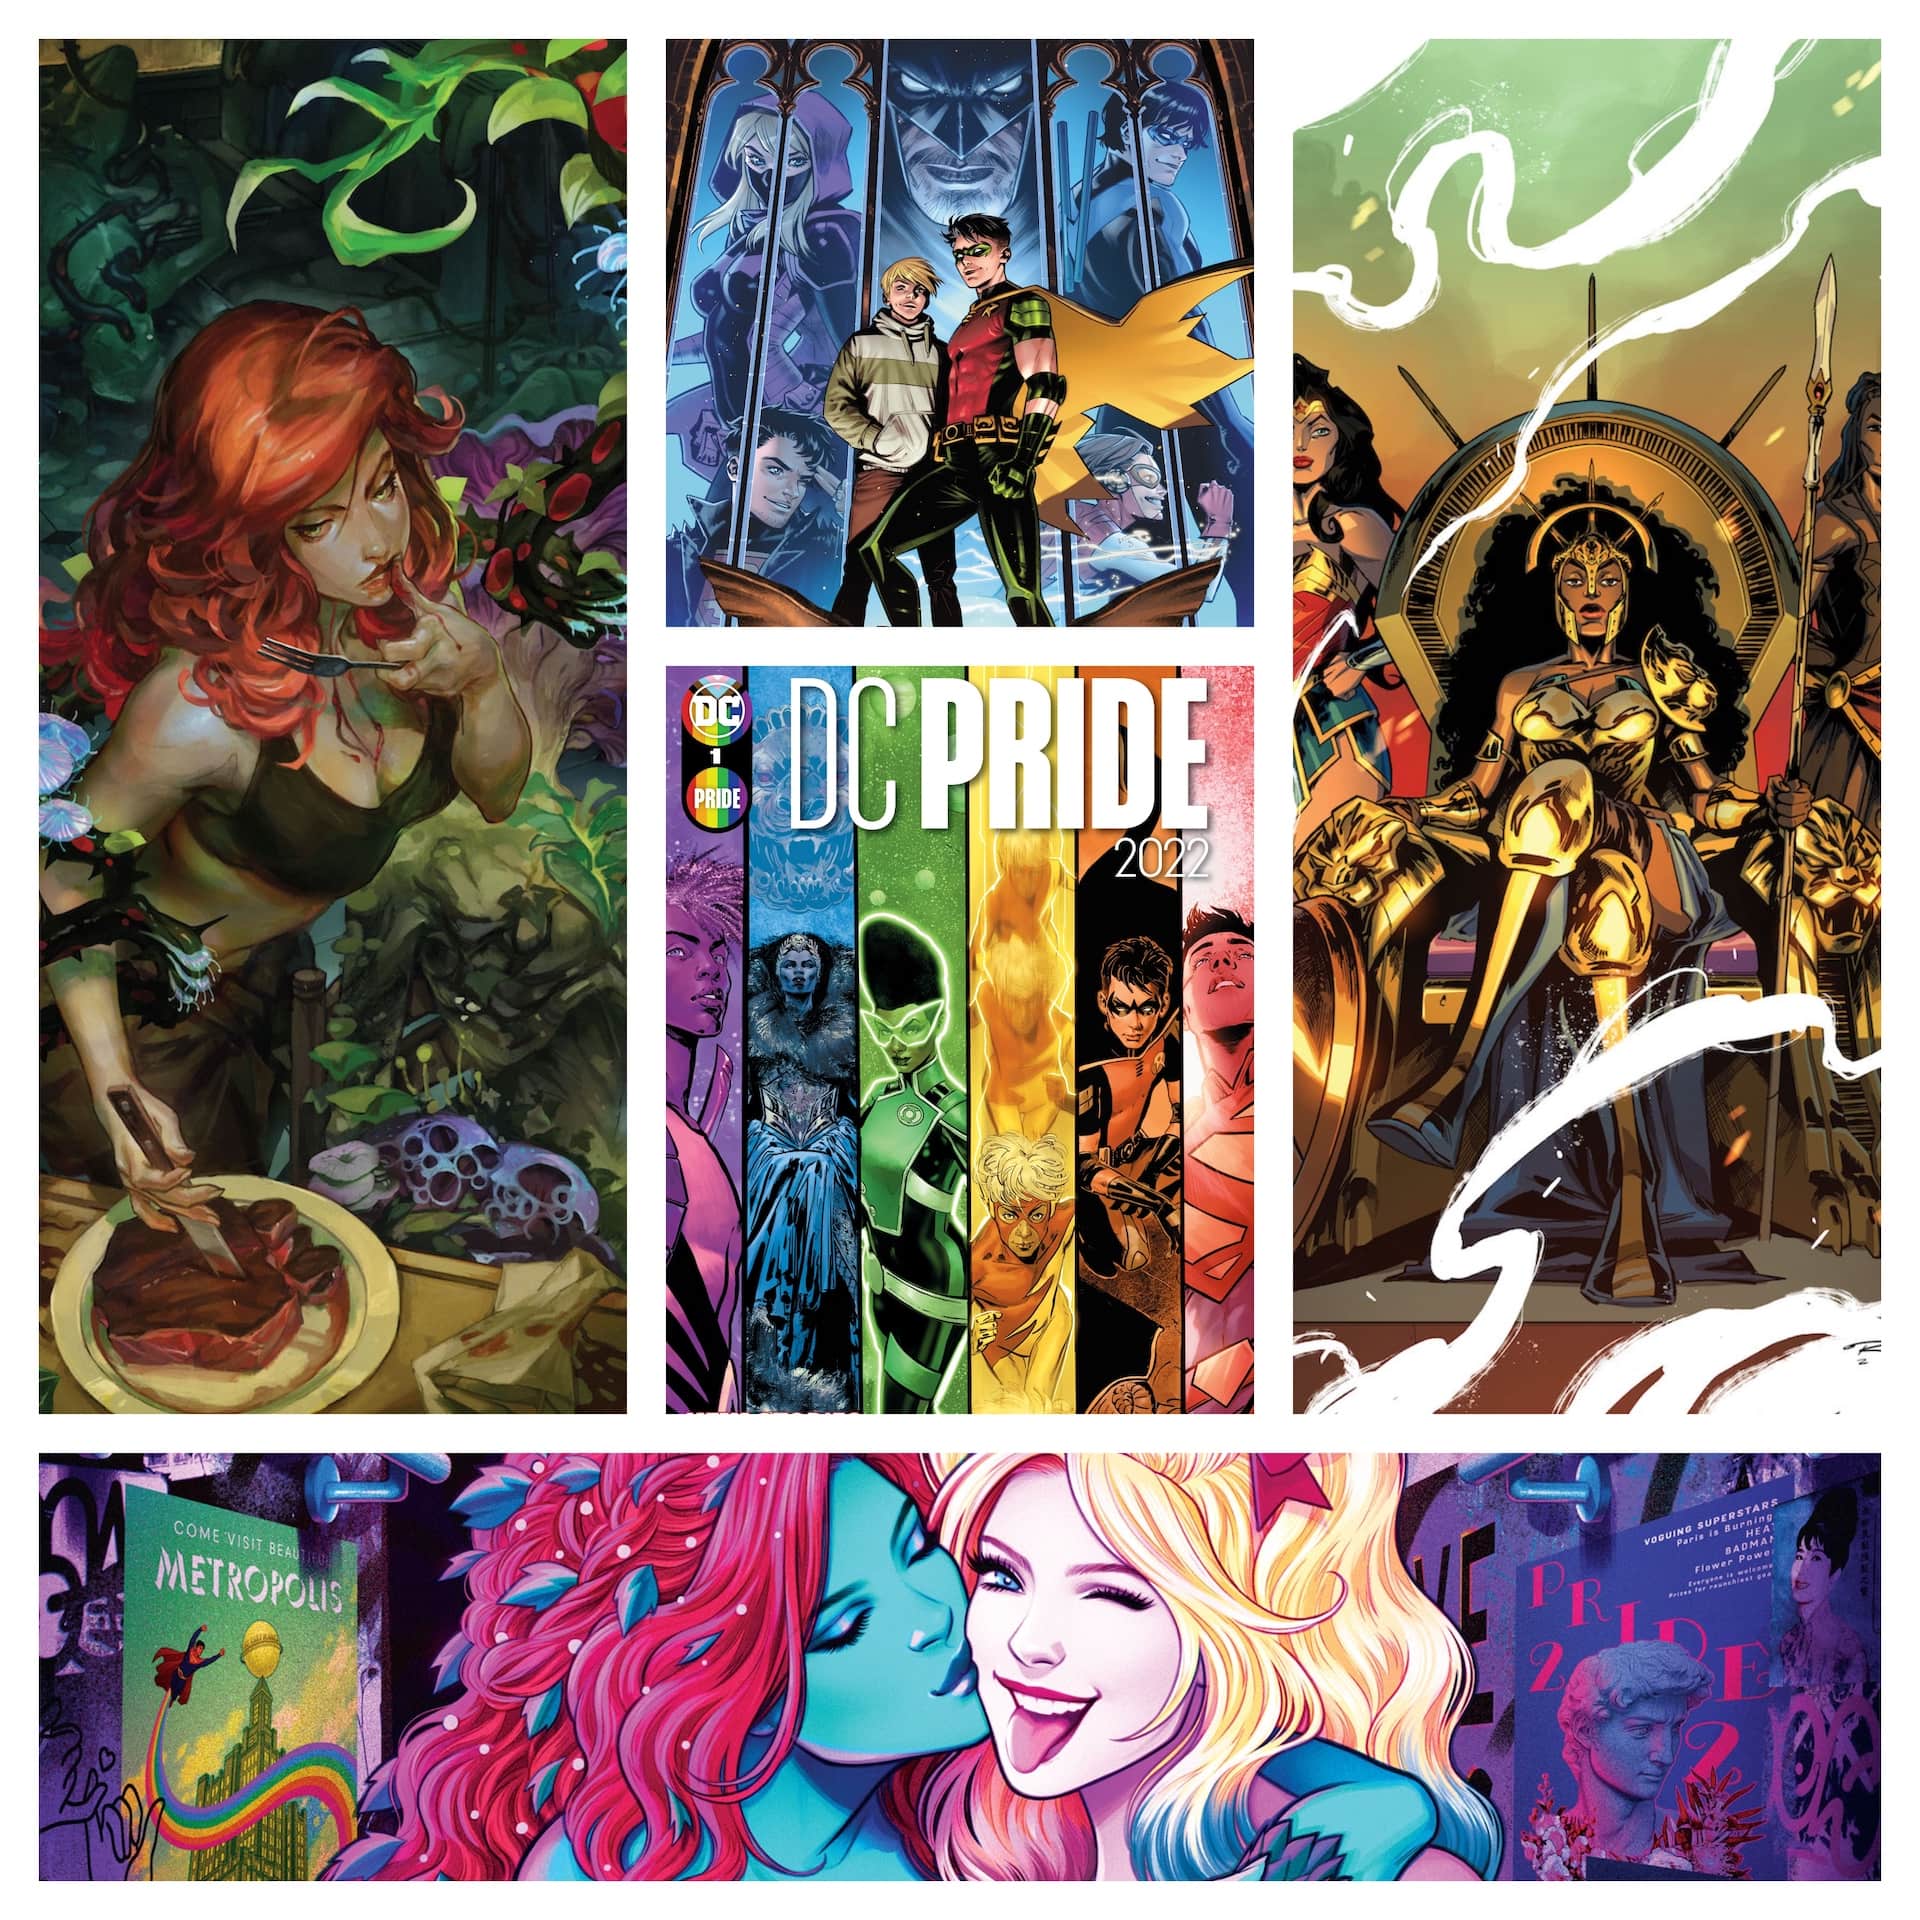 DC Comics reveals full DC Pride 2022 plans with 104-page anthology, new series, and more